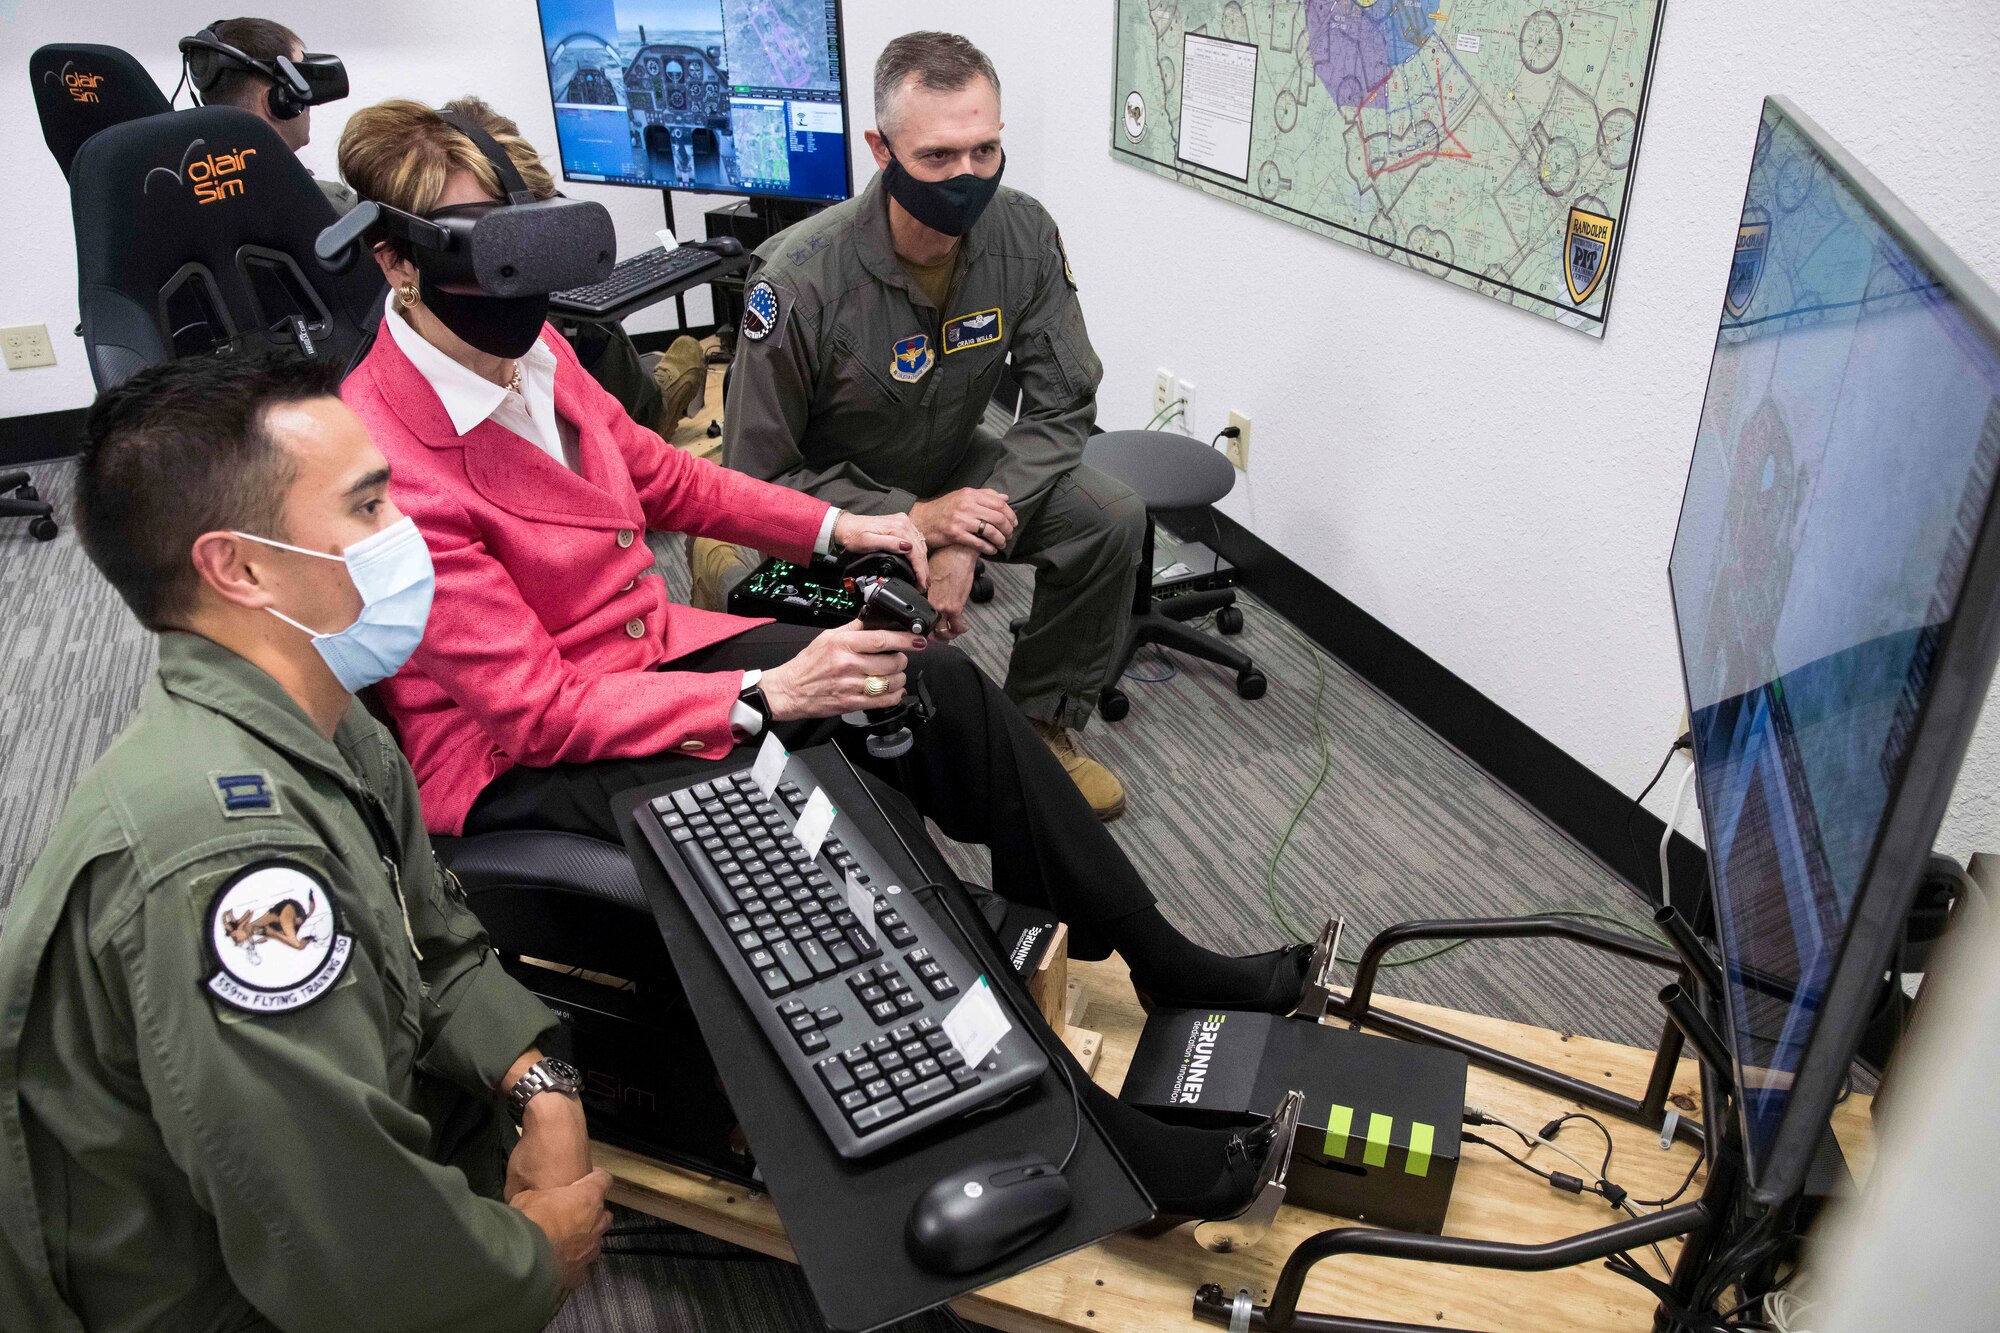 Secretary of the Air Force Barbara Barrett uses a virtual reality flight simulator as U.S. Air Force Capt. Orion Kellogg (left) and Maj. Gen. Craig Wills, 19th Air Force commander (right), look on  during her visit to Undergraduate Pilot Training 2.5 Aug. 20, 2020, at Joint Base San Antonio-Randolph, Texas. Barrett, along with Chief of Staff of the Air Force Charles Q. Brown Jr., and Chief Master Sgt. of the Air Force JoAnne Bass toured Air Education and Training Commands UPT 2.5  program, which scales lessons learned from Pilot Training Next as part of their first joint visit.